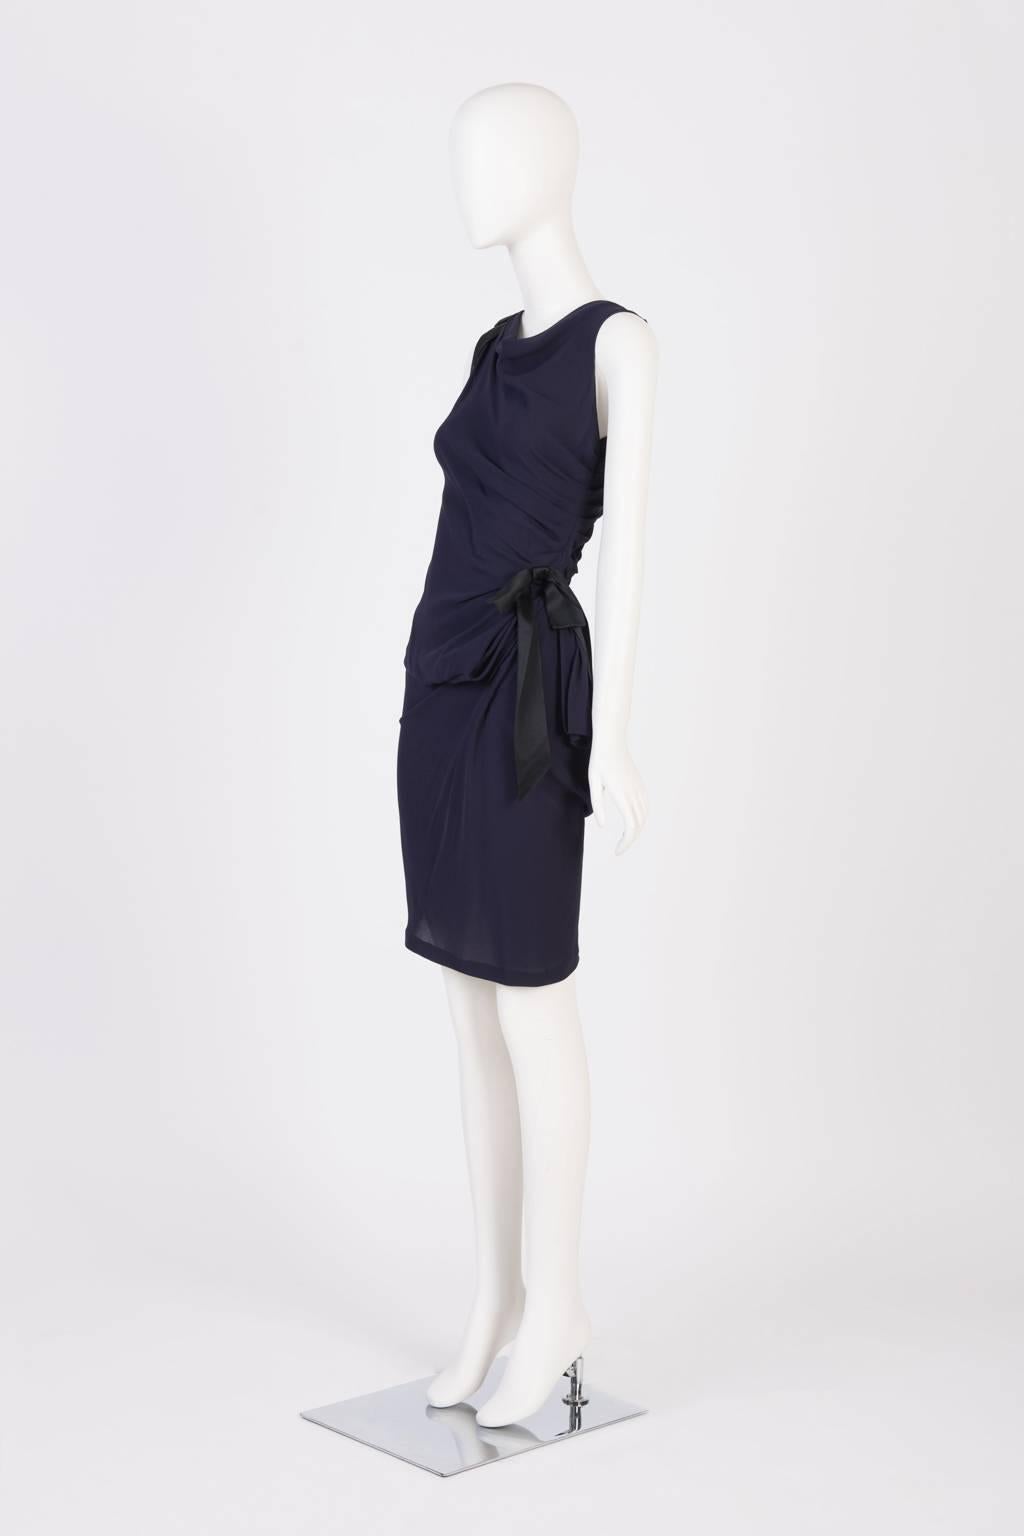 Sleeveless, knee length cocktail dress in bias cut purple silk crepe with bow detail on one shouder and side waist.  